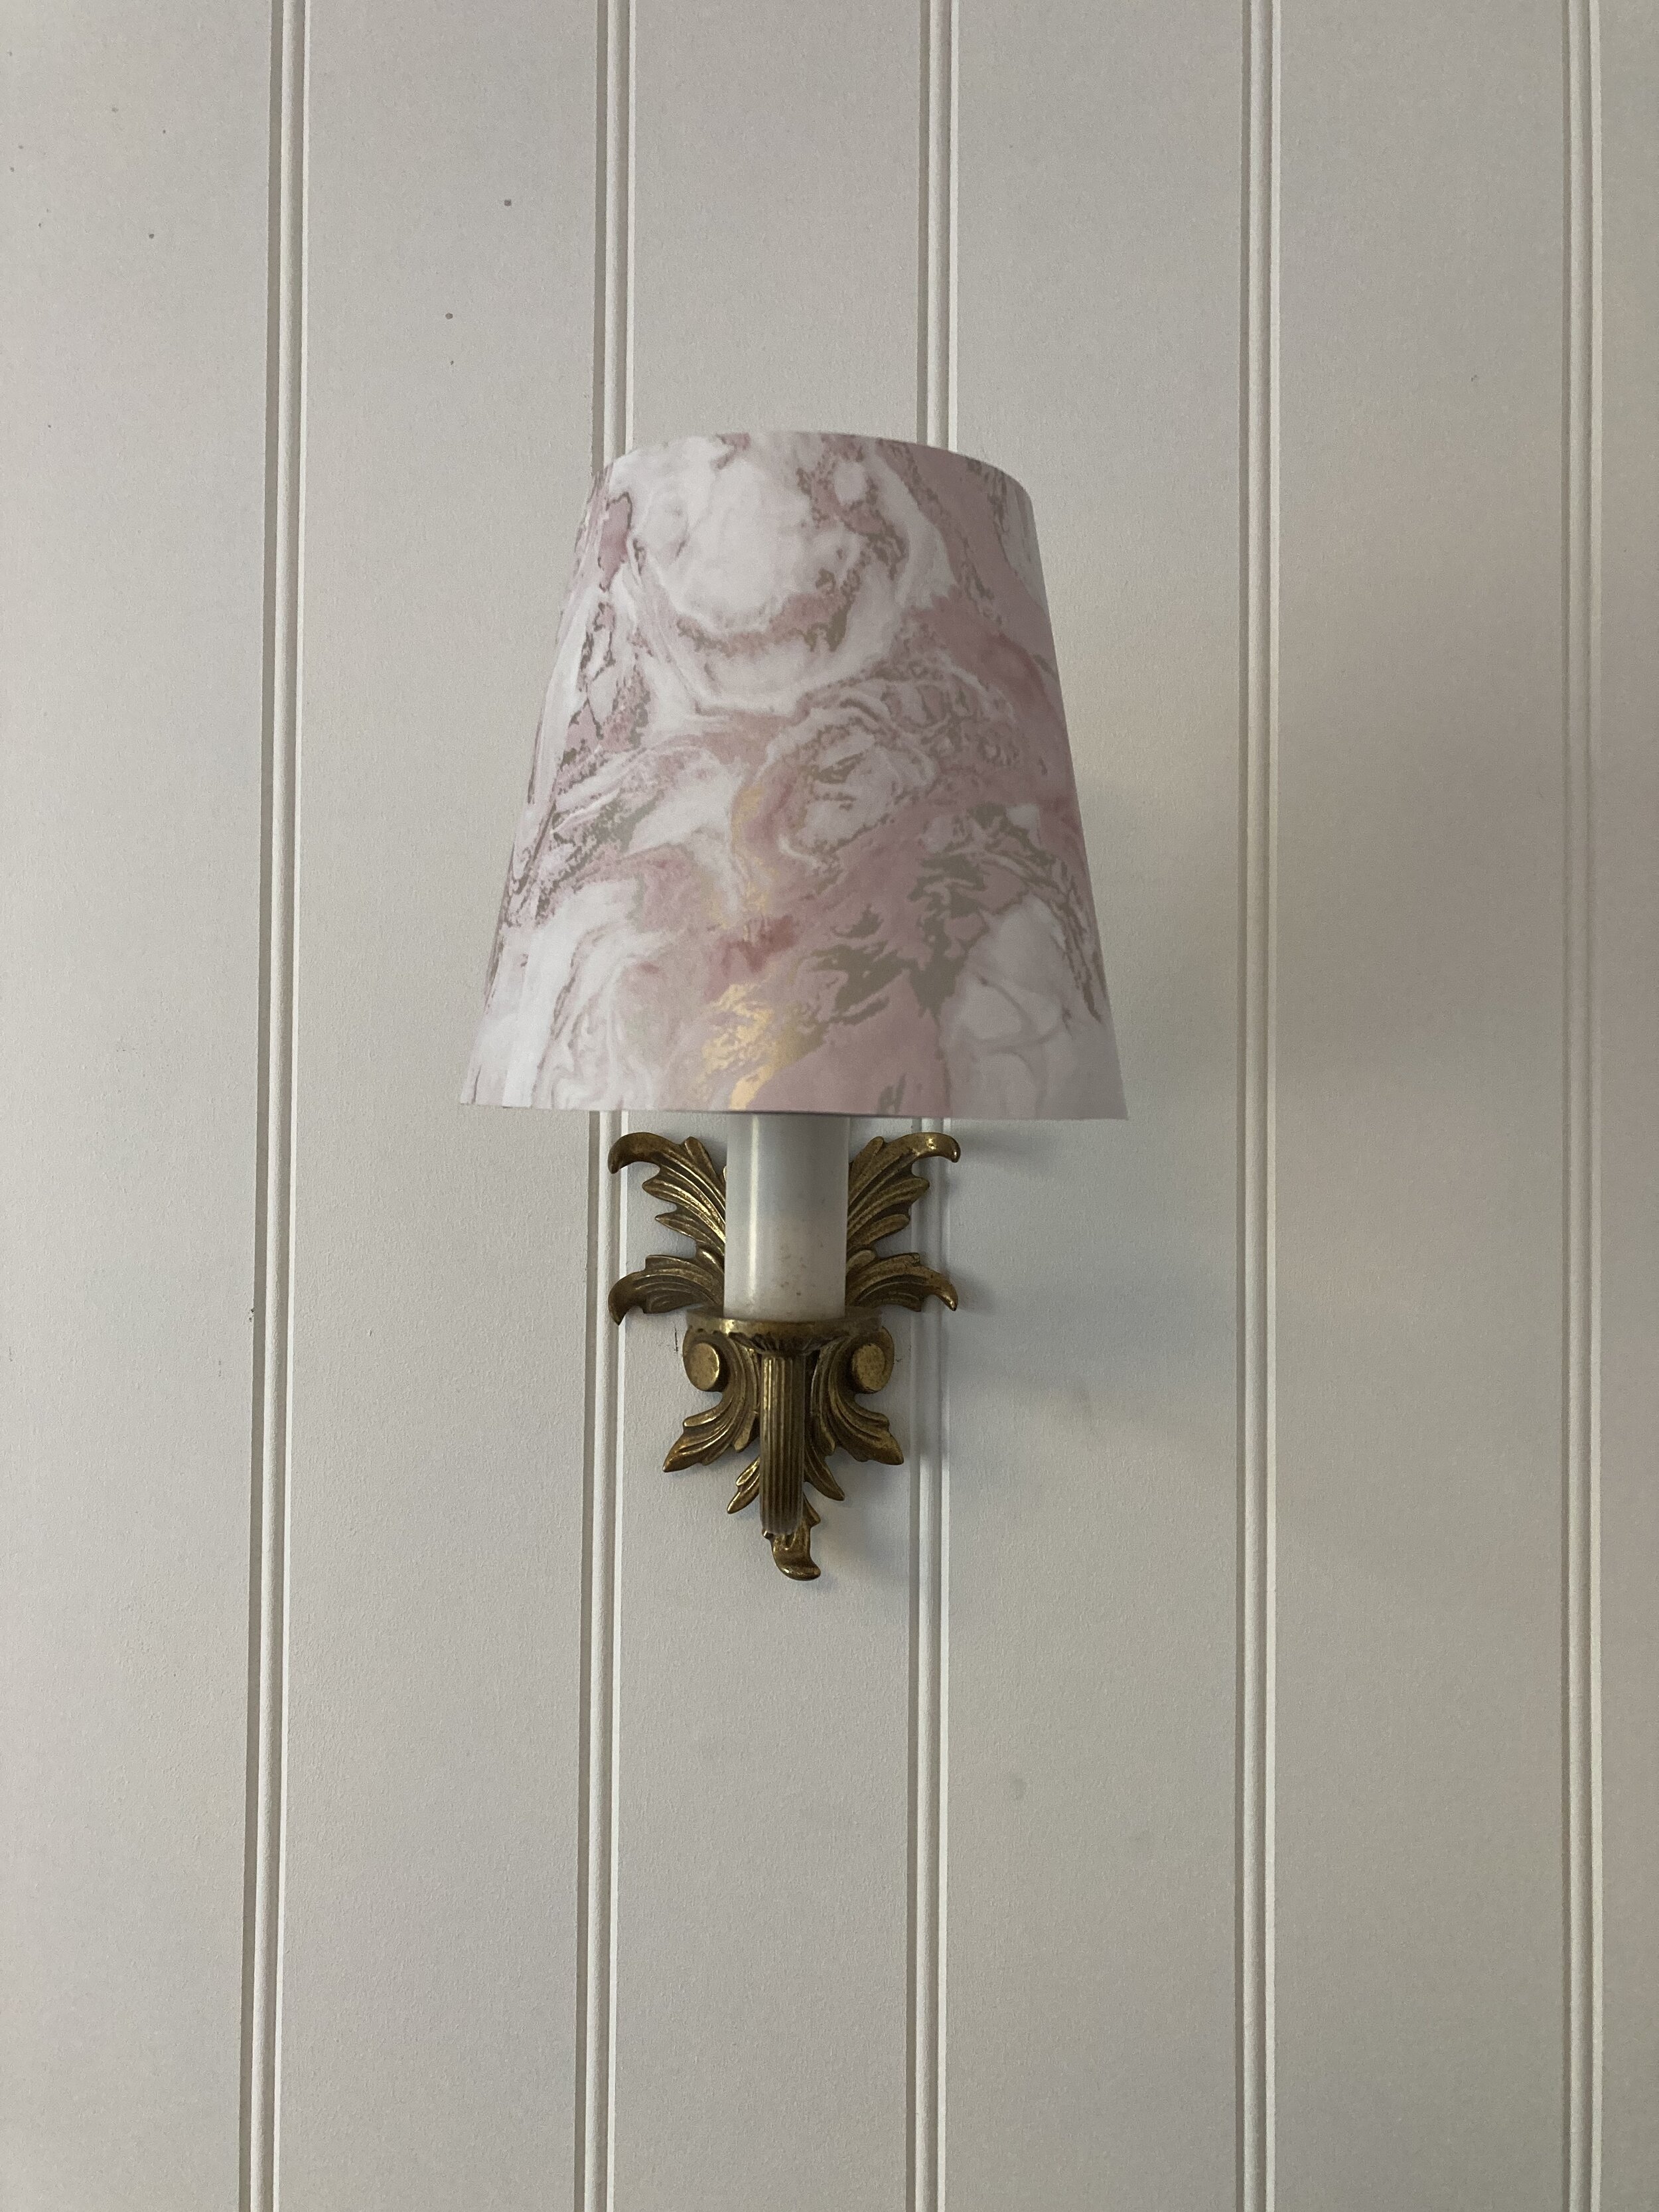 Candle Clip lampshade for wall light in pink marbled paper